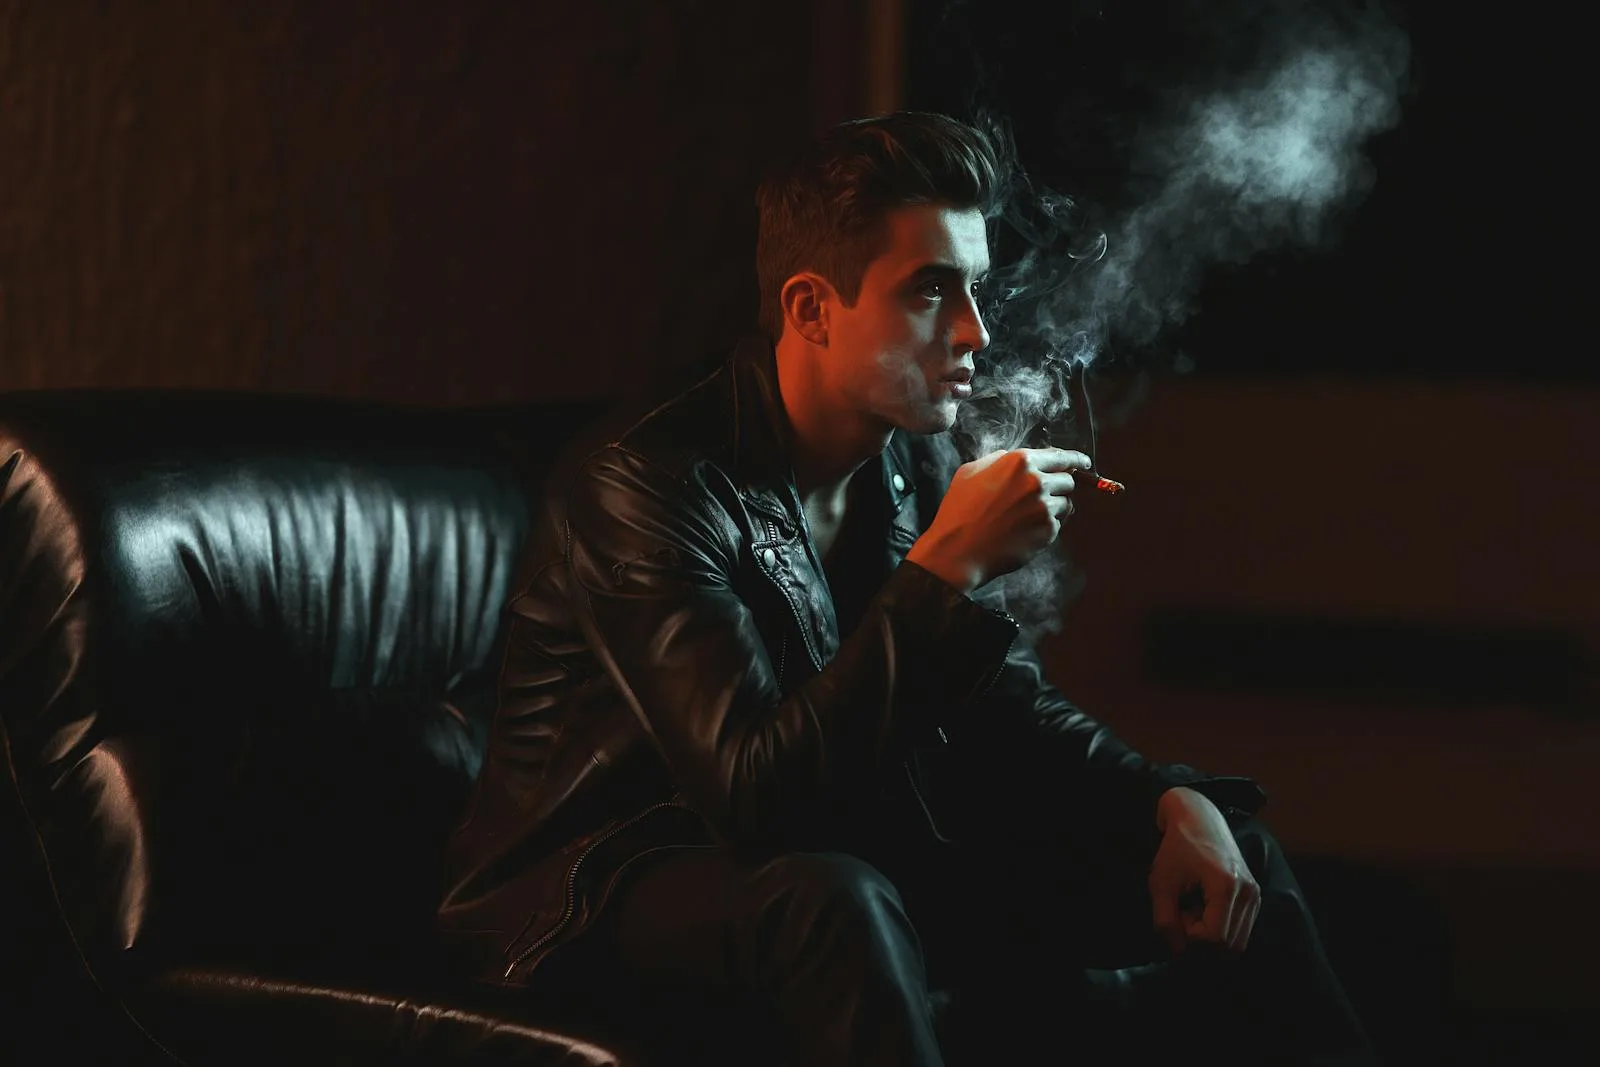 Man Holding Cigarette While Sitting on Sofa - remove air pollutants